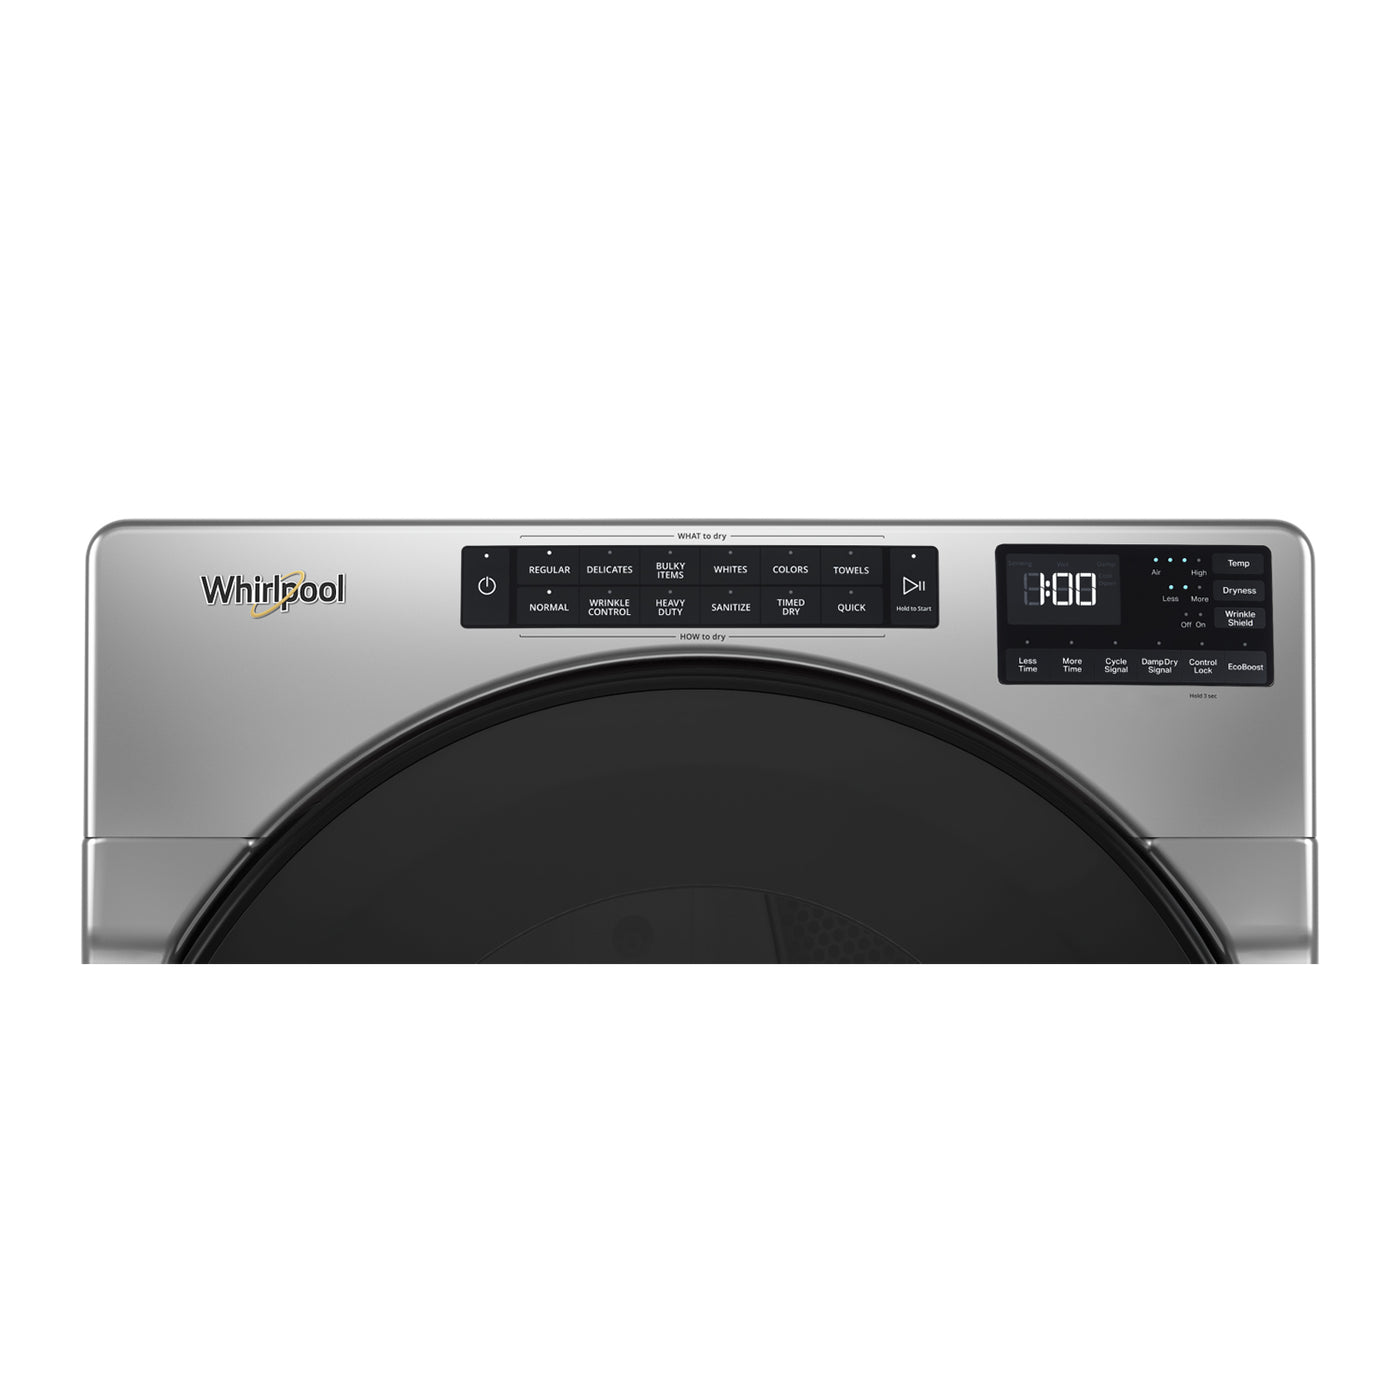 Whirlpool Chrome Shadow Front-Load Washer (5.8 cu. ft.) & Gas Dryer (7.4 cu. ft.) - WFW6605MC/WGD5605MC